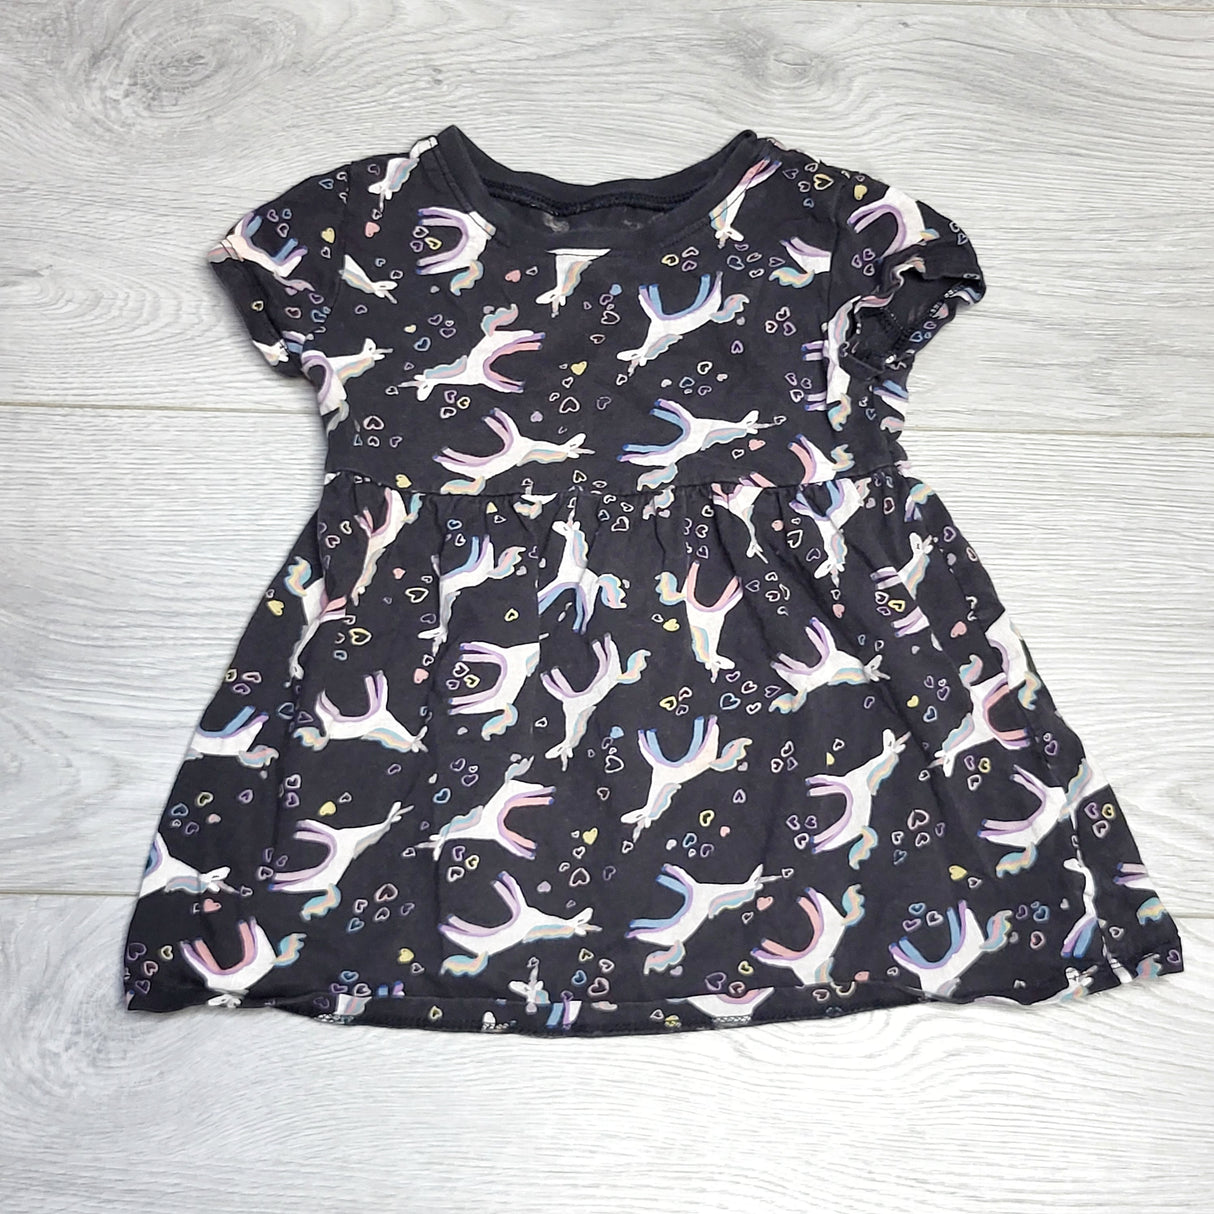 DCON22 - Old Navy grey cotton dress with unicorns, 18-24 months